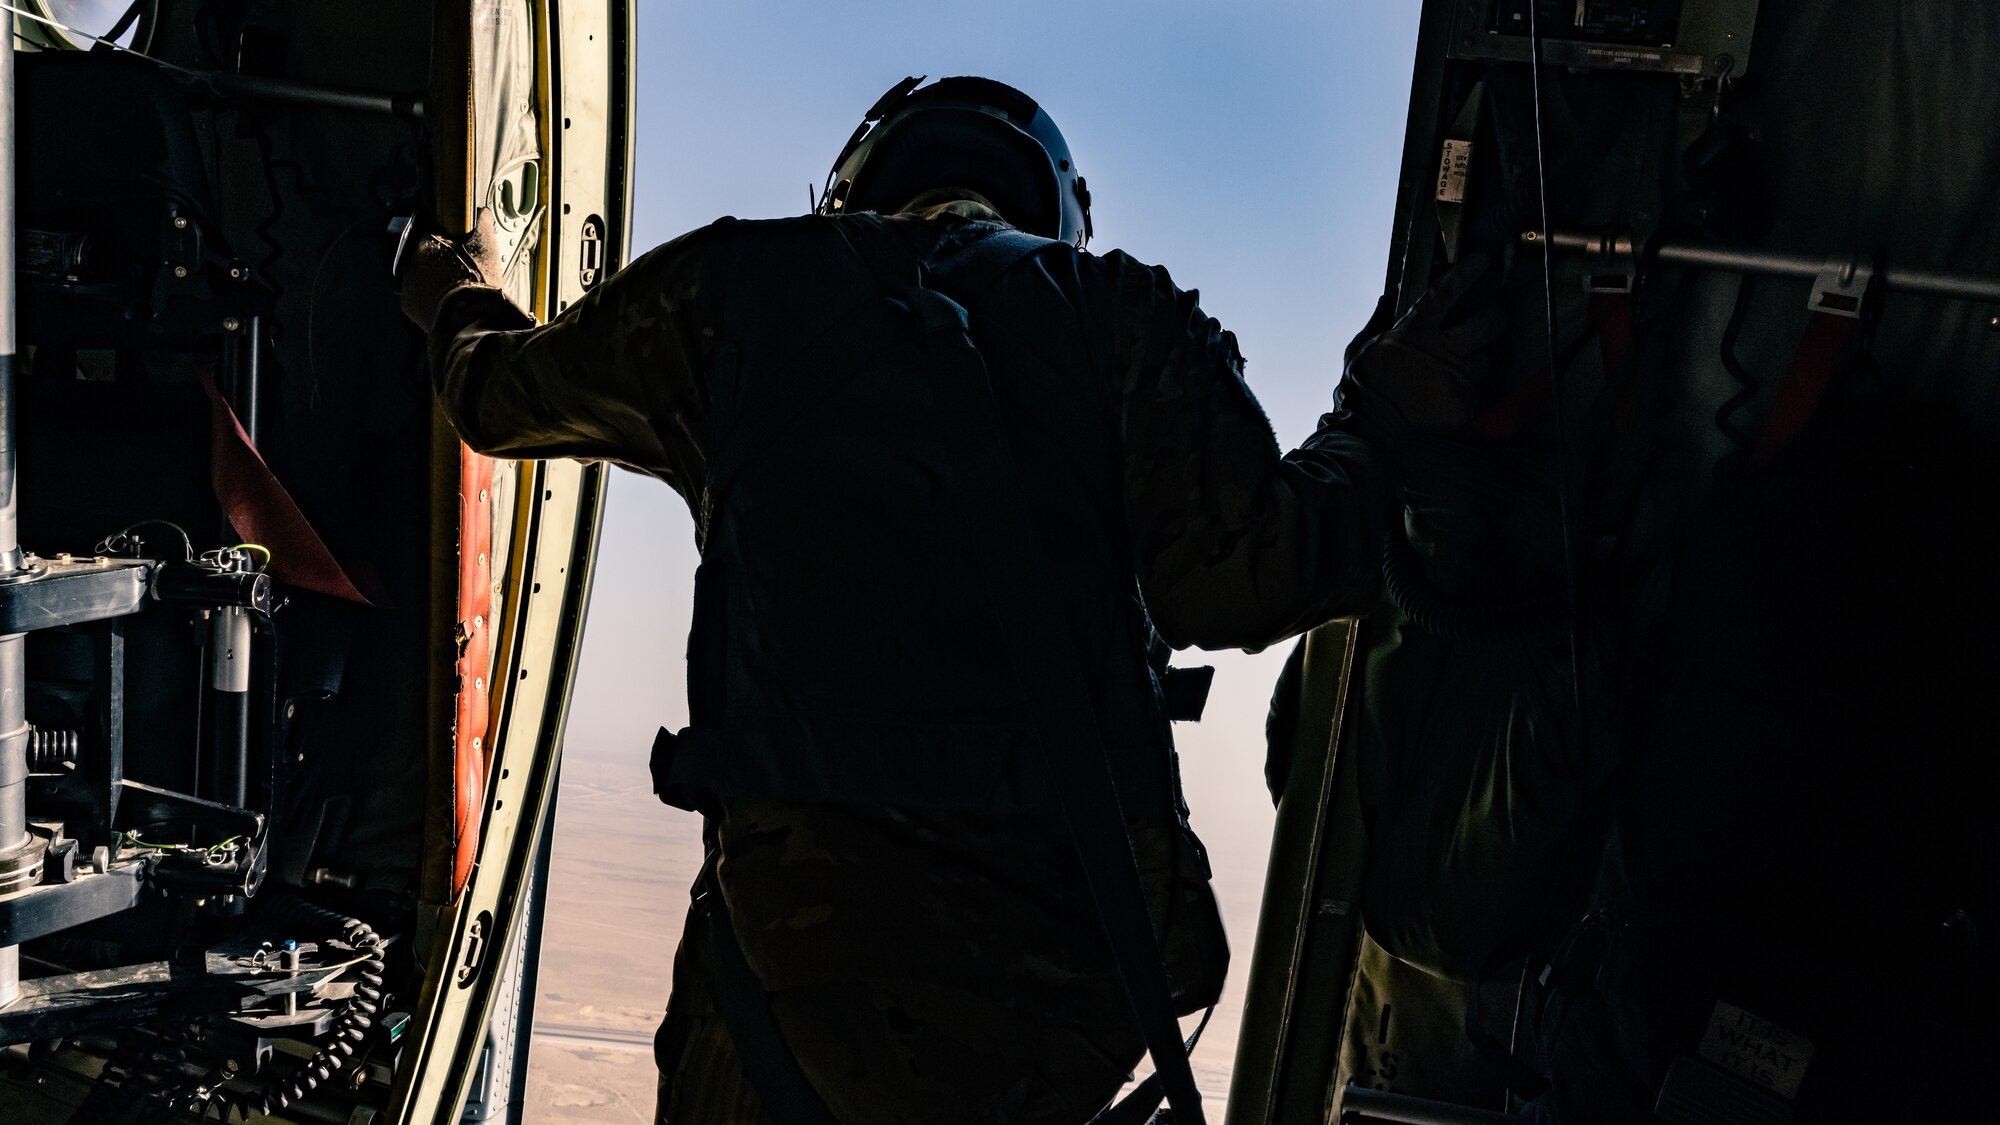 A U.S. Air Force loadmaster assigned to the 61st Expeditionary Airlift Squadron at the 386th Air Expeditionary Wing performs a safety check on the exit of a C-130J Super Hercules during an airborne operation over Egypt in support of exercise Bright Star 23, Sept. 7, 2023. Bright Star 23 is a multilateral U.S. Central Command exercise held with the Arab Republic of Egypt across air, land, and sea domains that promotes and enhances regional security and cooperation, and improves interoperability in irregular warfare against hybrid threat scenarios. (U.S. Air Force photo by Staff Sgt. Kevin Long)